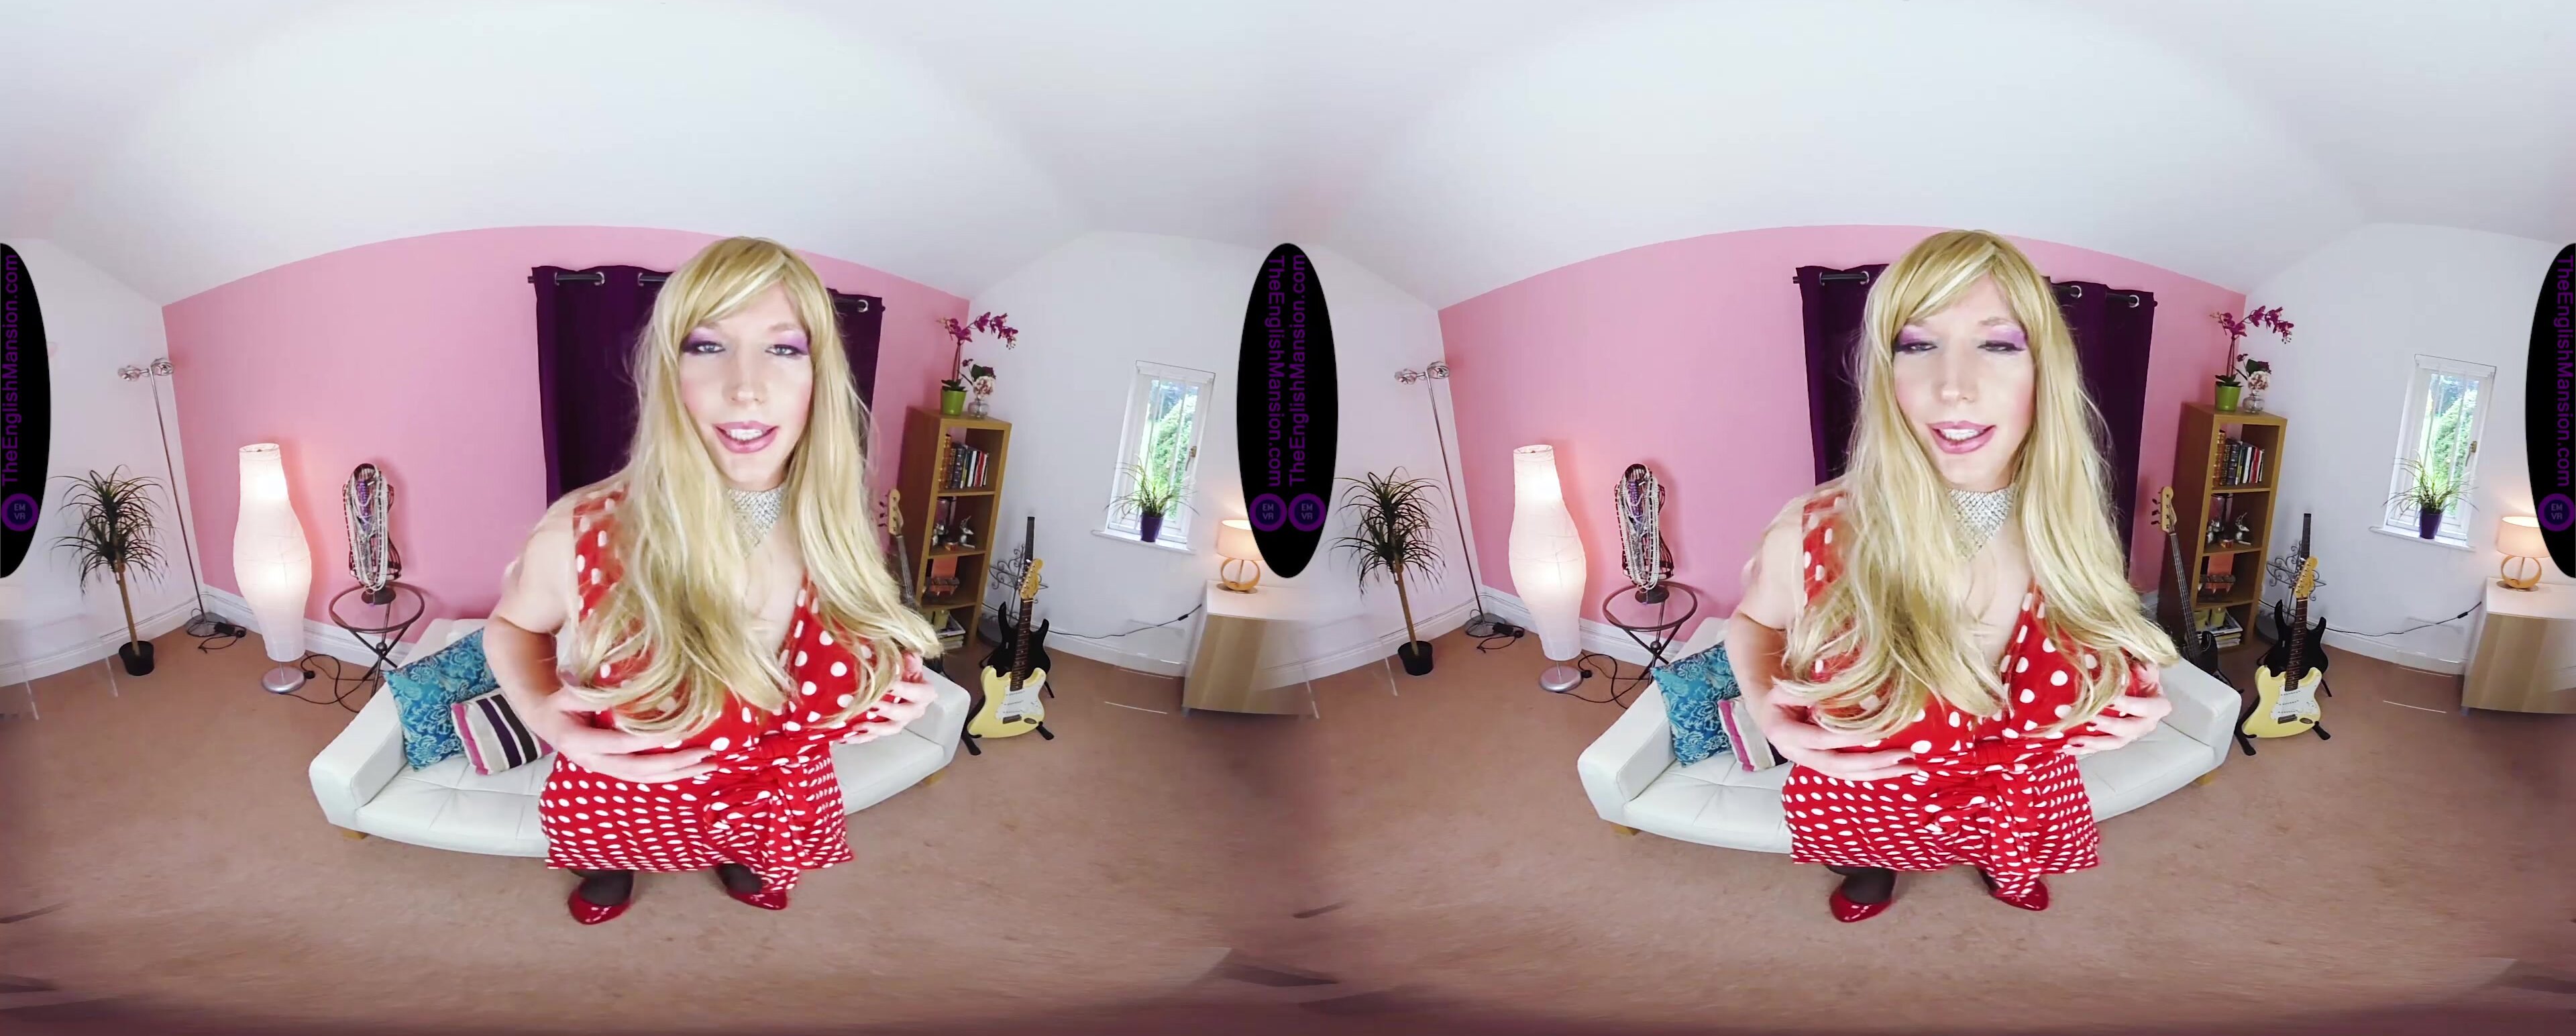 TheEnglishMansion - Red Dress Cock Tease Vr180x180 3dh